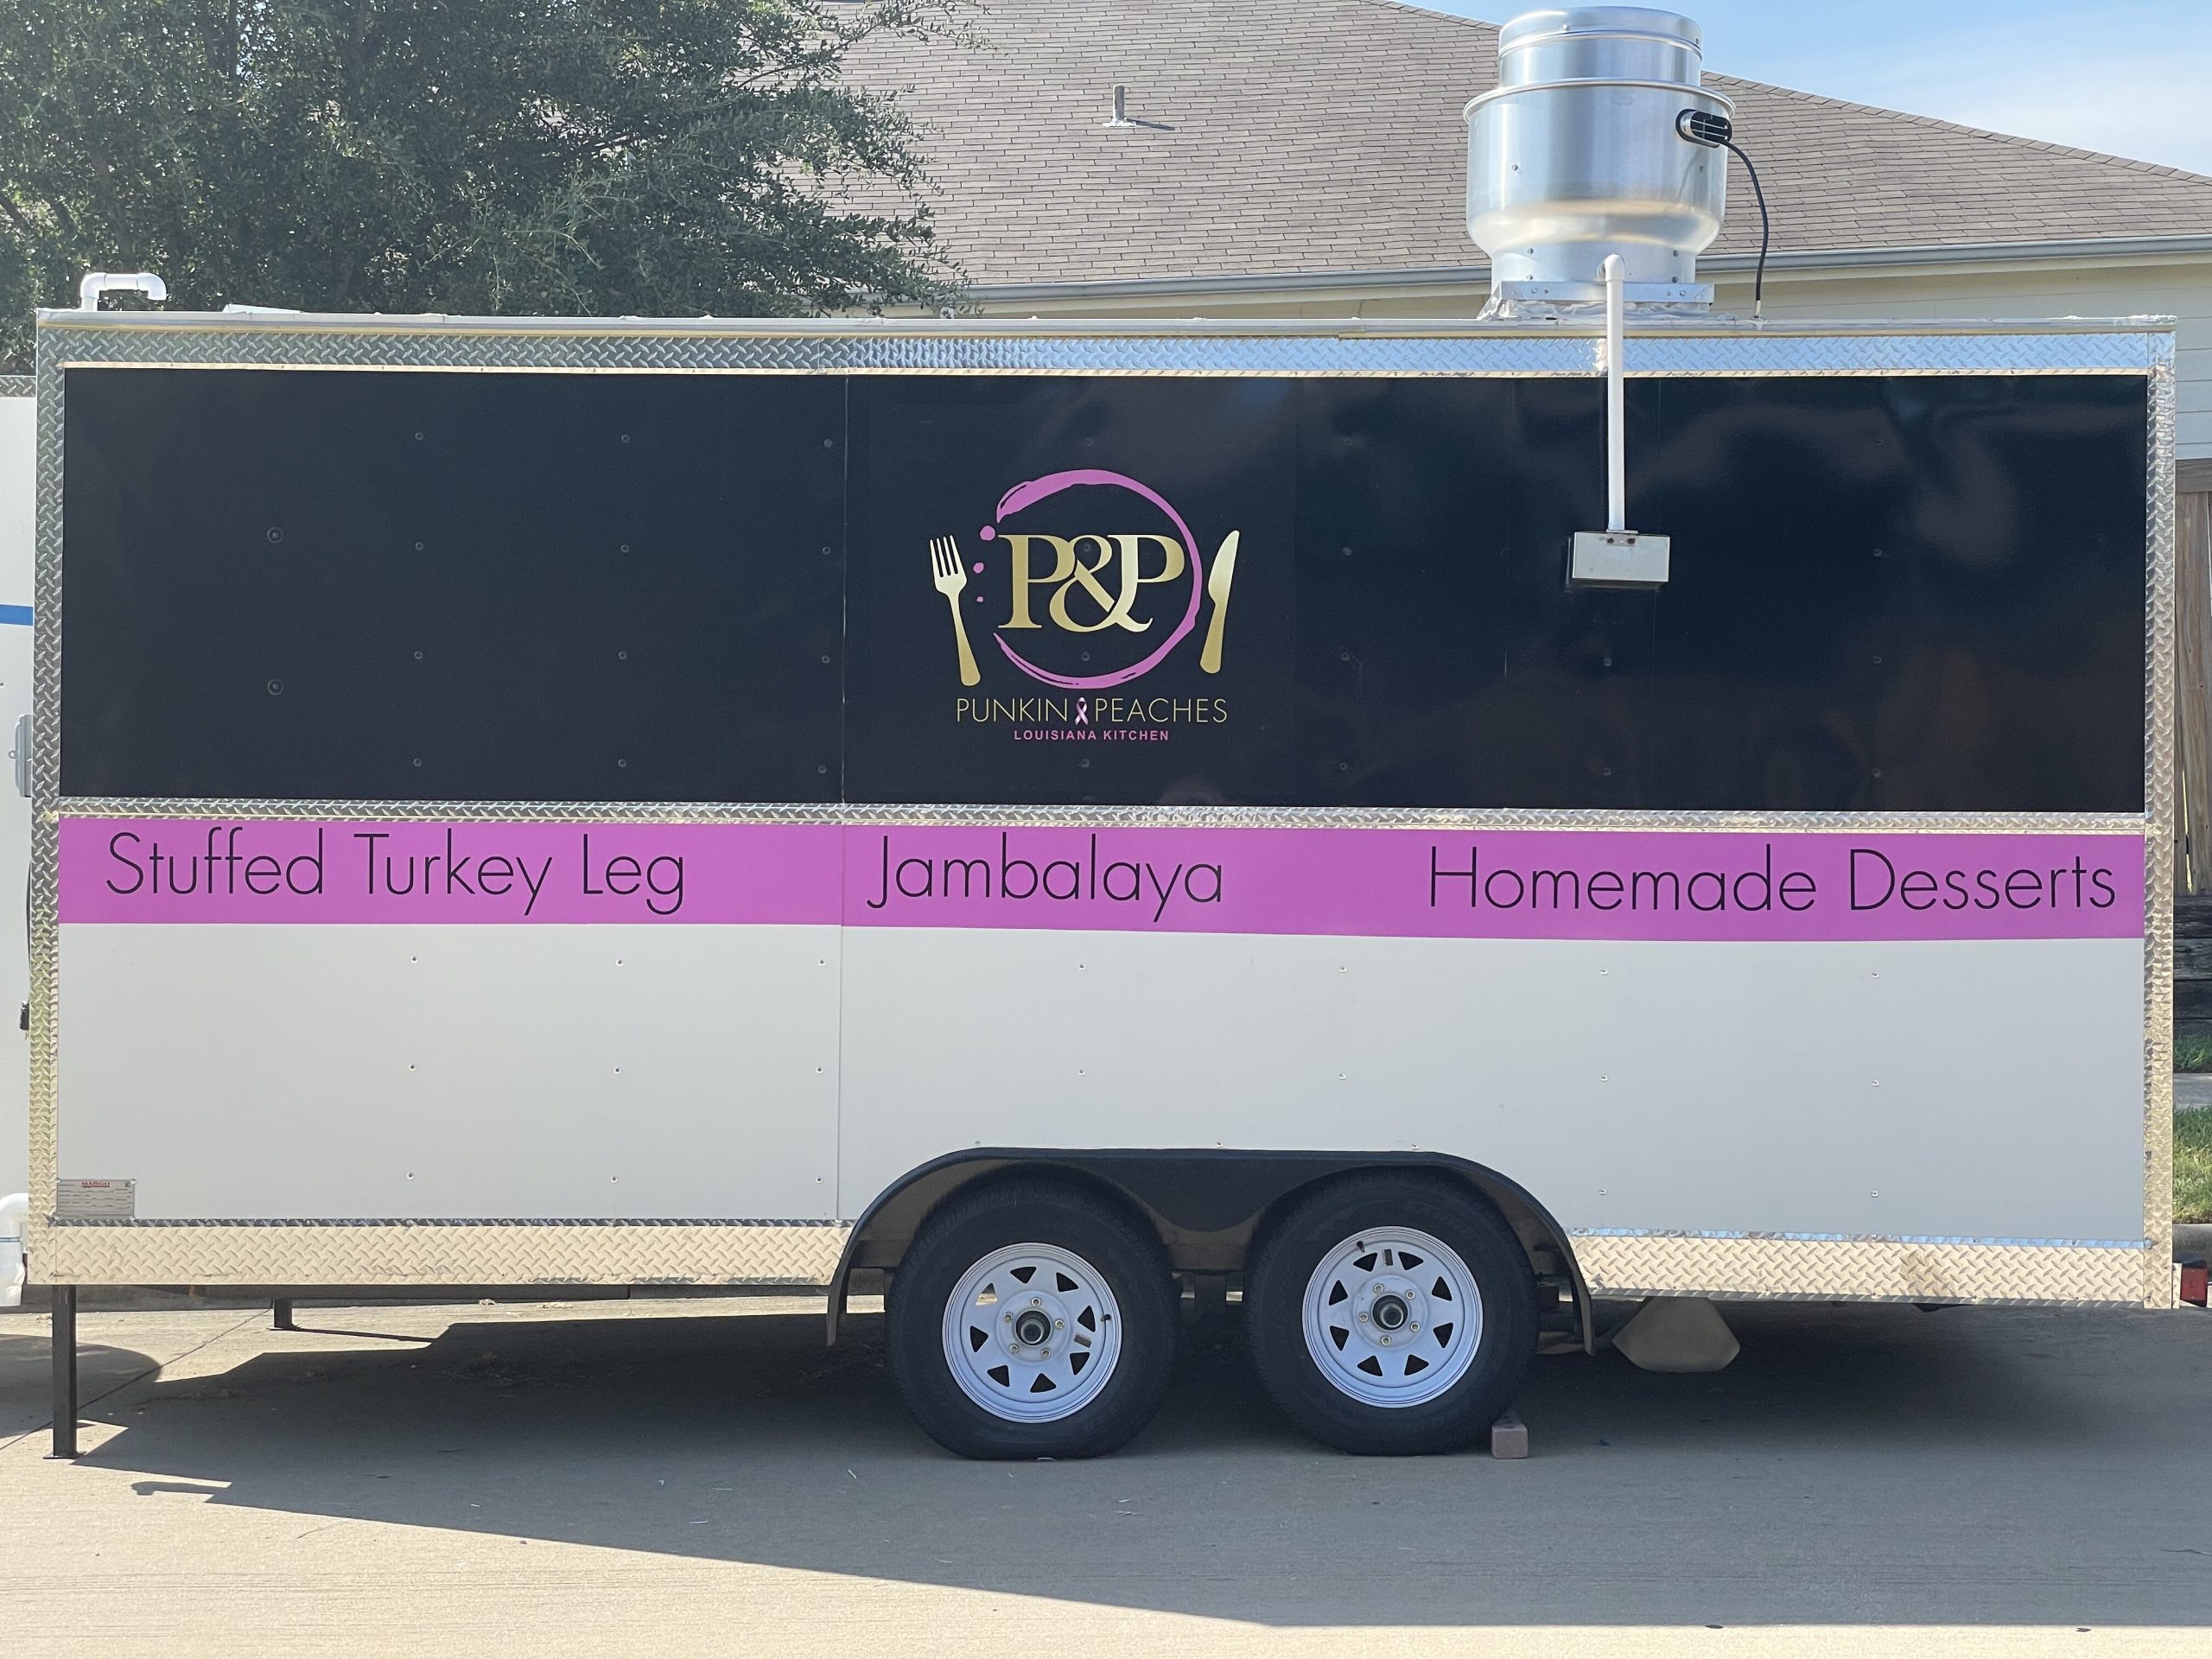 Food vehicle wrap for P&P installed by Premier Signs & Graphics in Dallas, TX